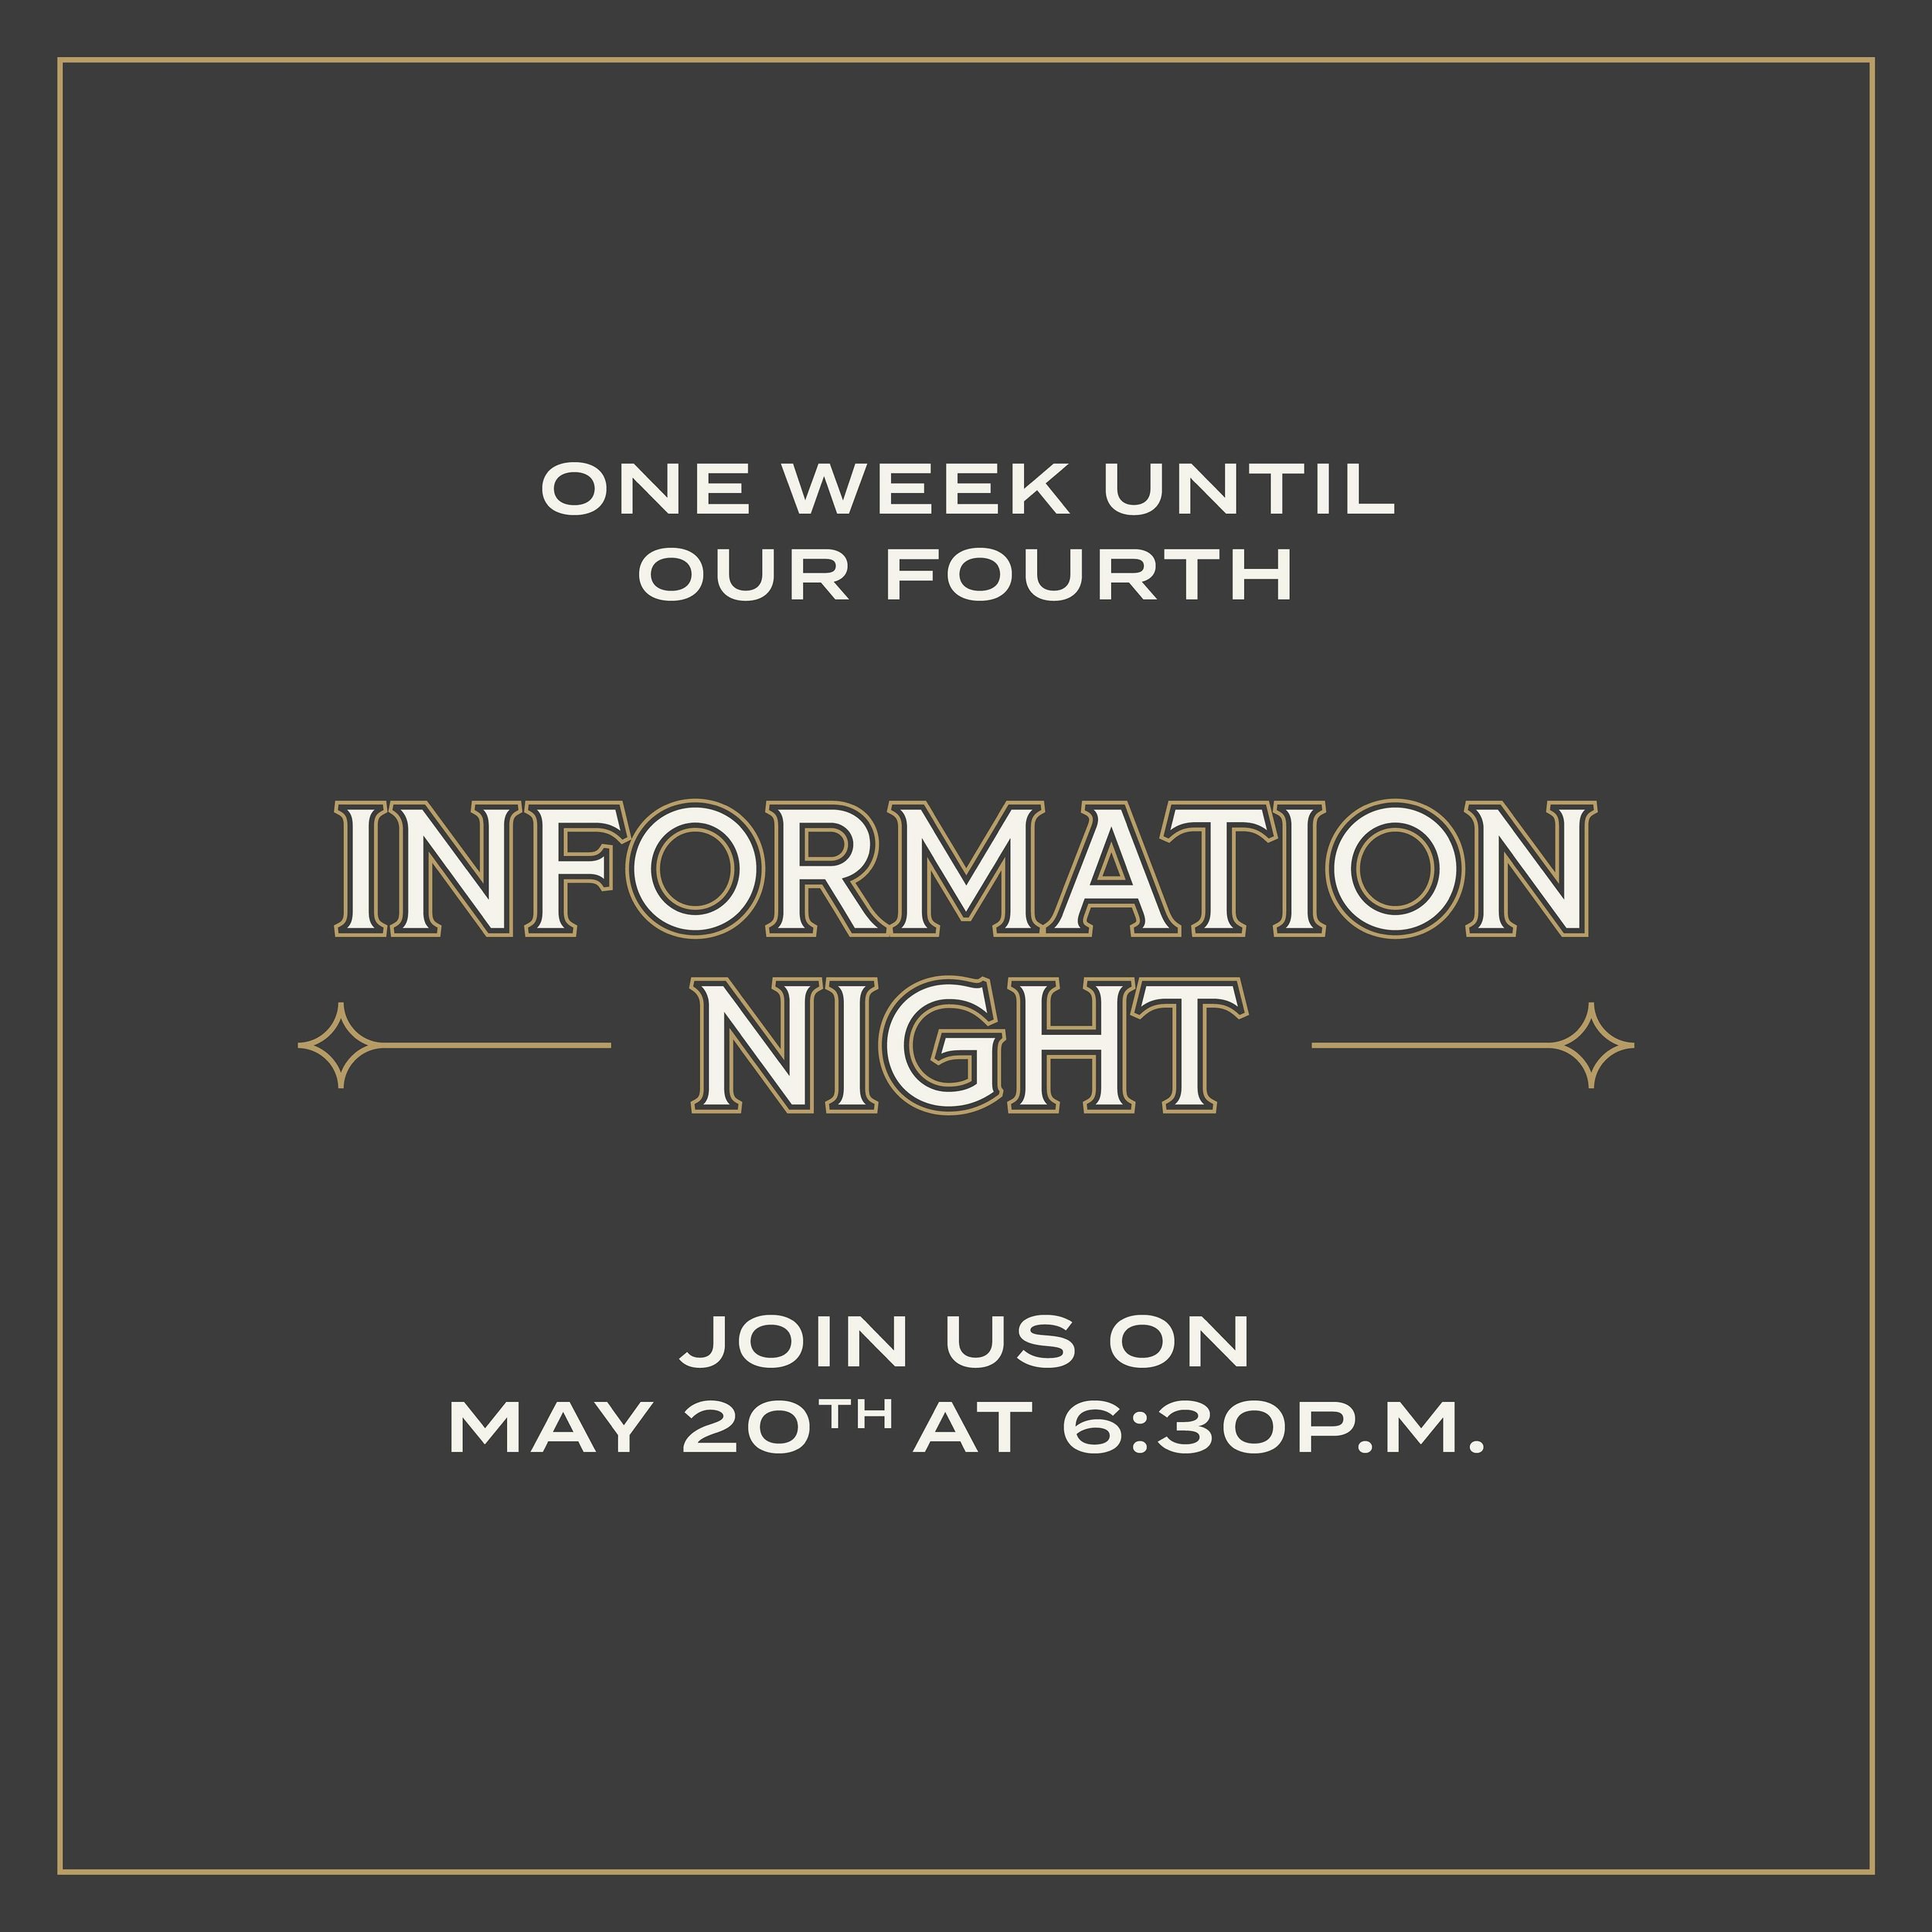 One more week till our info night! We hope to see you there!